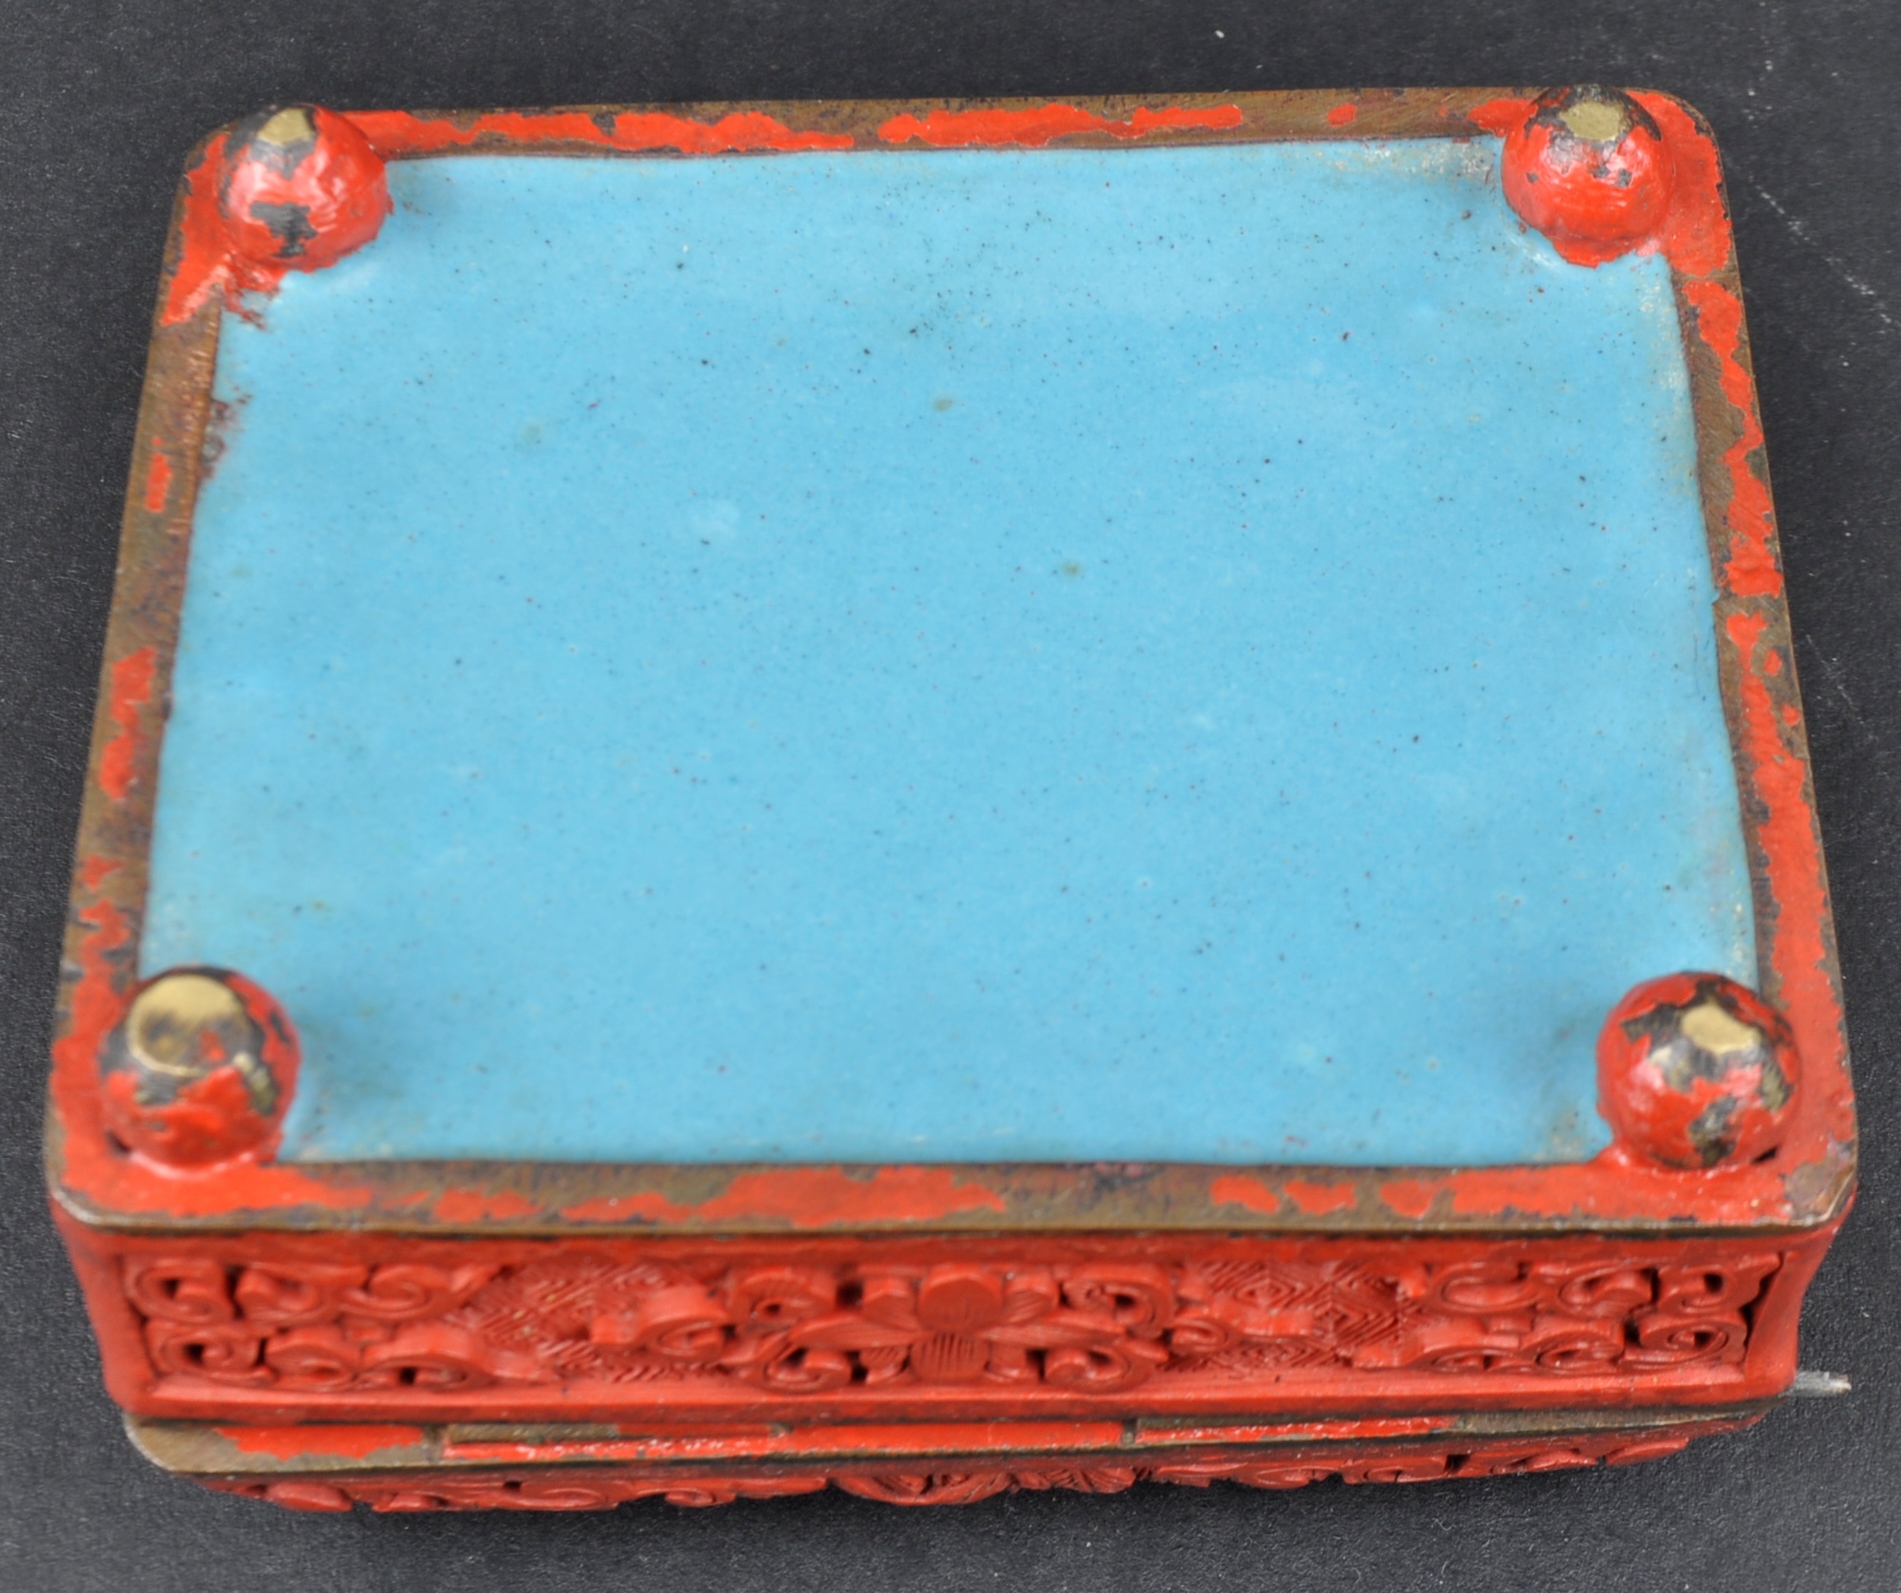 EARLY 20TH CENTURY CHINESE CINNABAR LACQUER BOX - Image 5 of 5